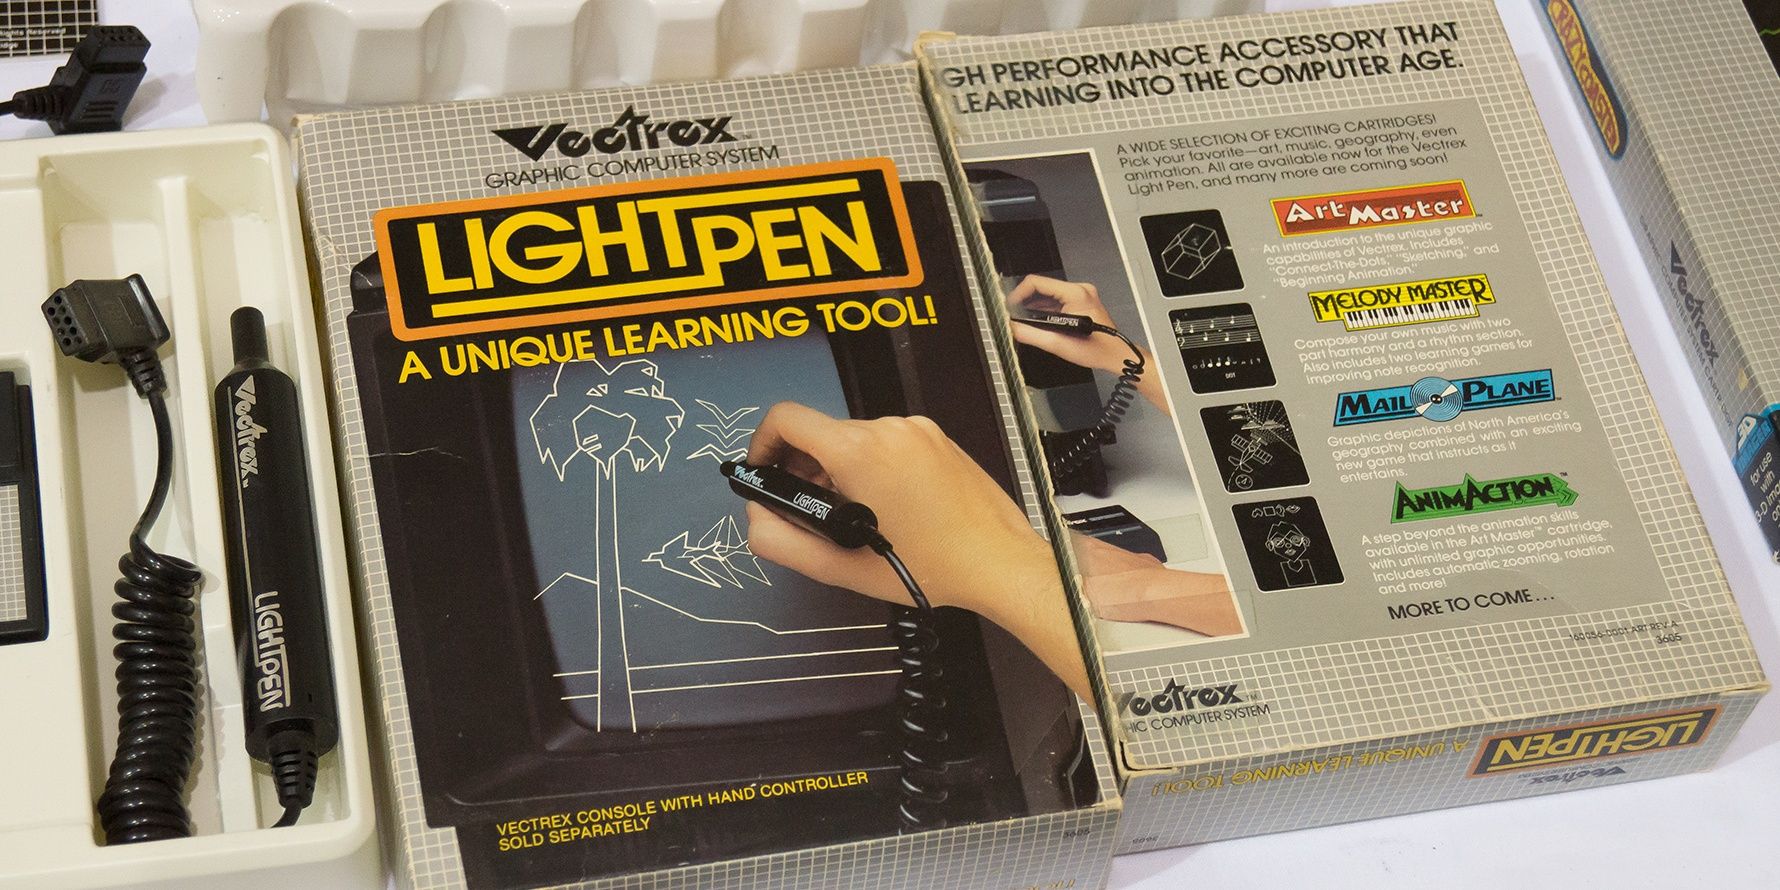 A photo showing the Light Pen for the Vectrex Gaming Console